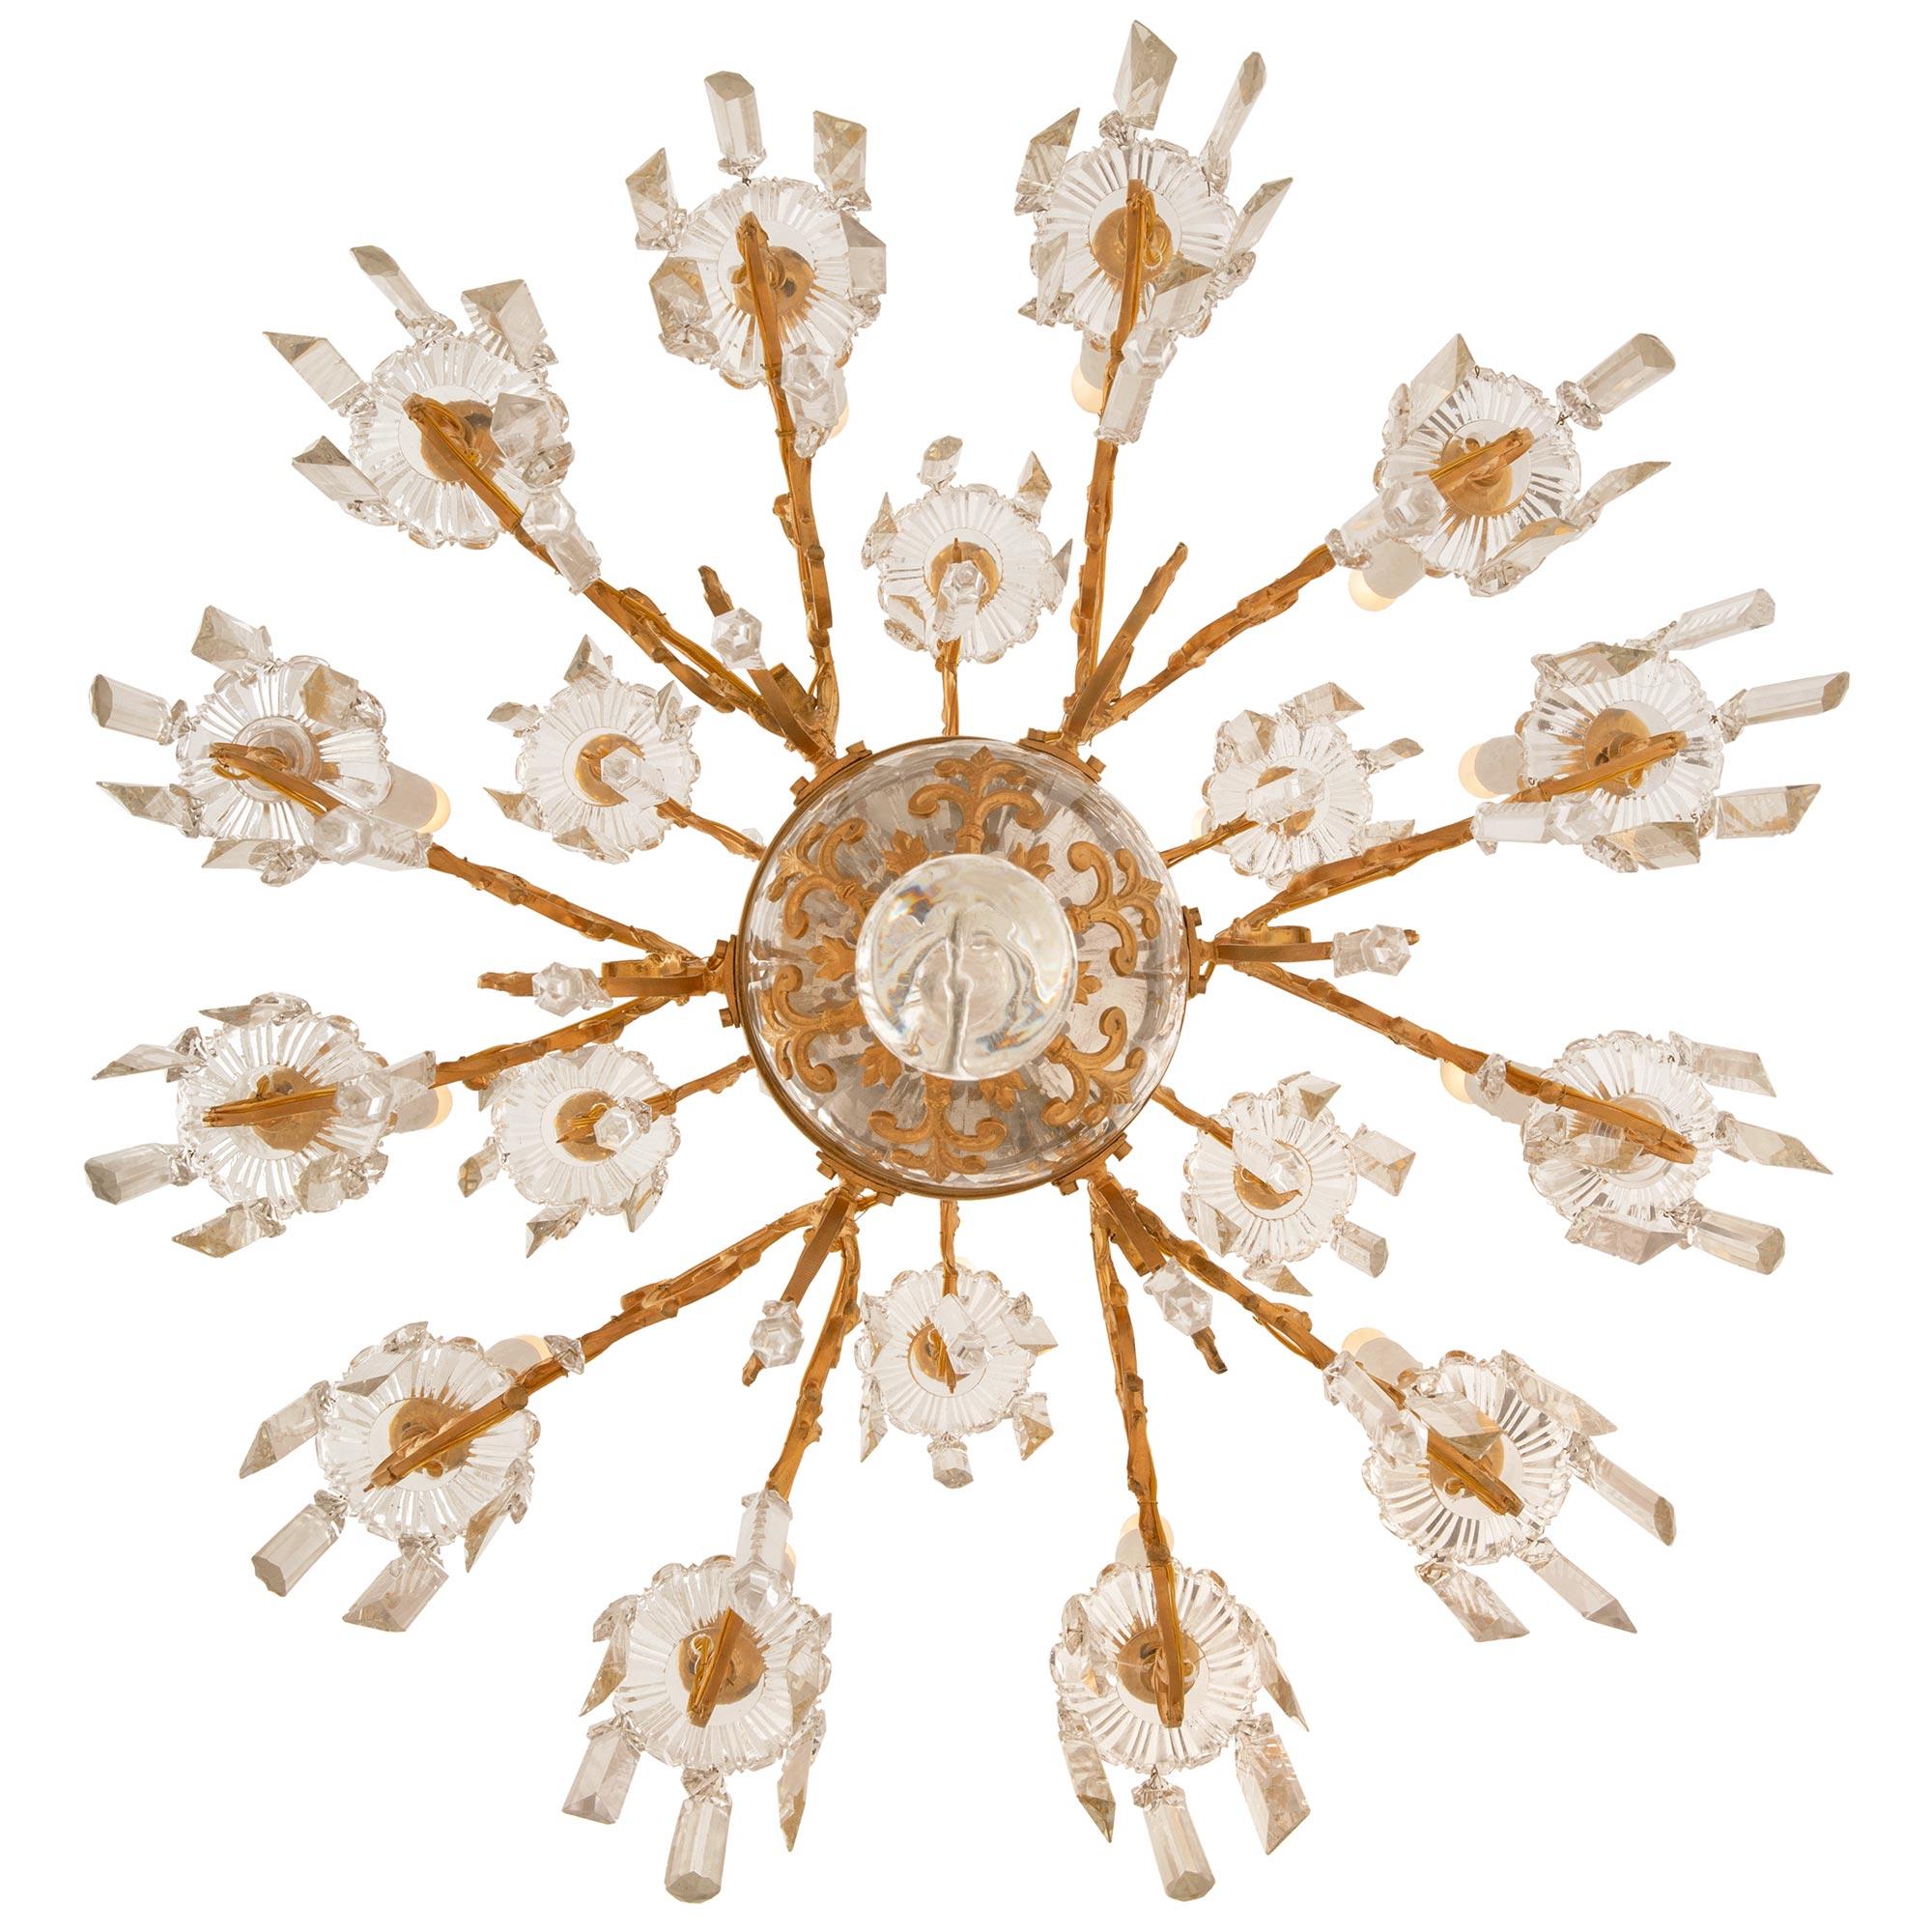 A stunning French 19th century Louis XVI st. Baccarat crystal and ormolu eighteen light chandelier. This unique chandelier is centered by a solid crystal ball leading up to a richly chased ormolu finial, below a large crystal sphere with pierced